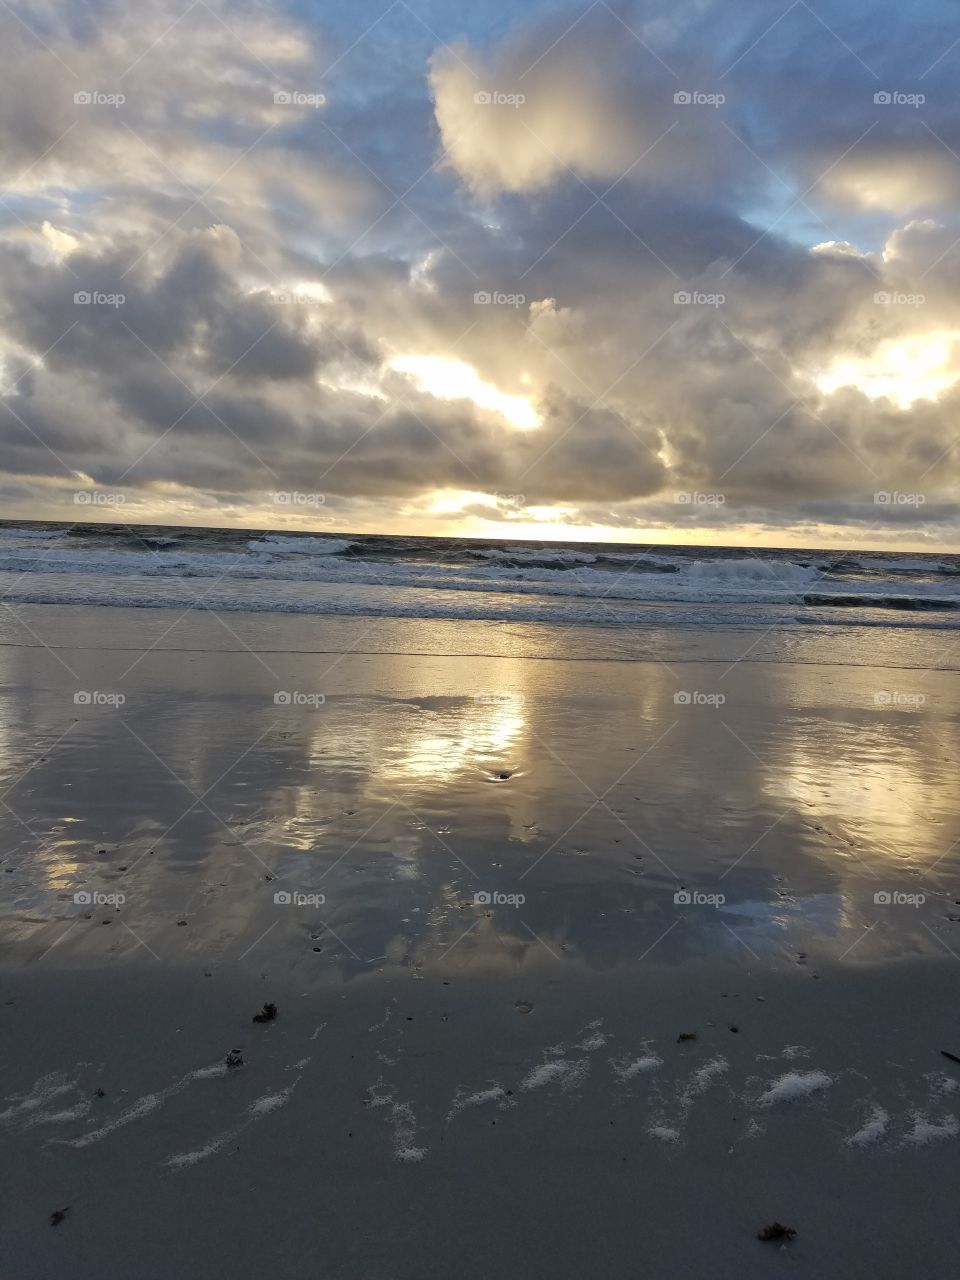 Reflective sky and clouds in sandy beach receding water